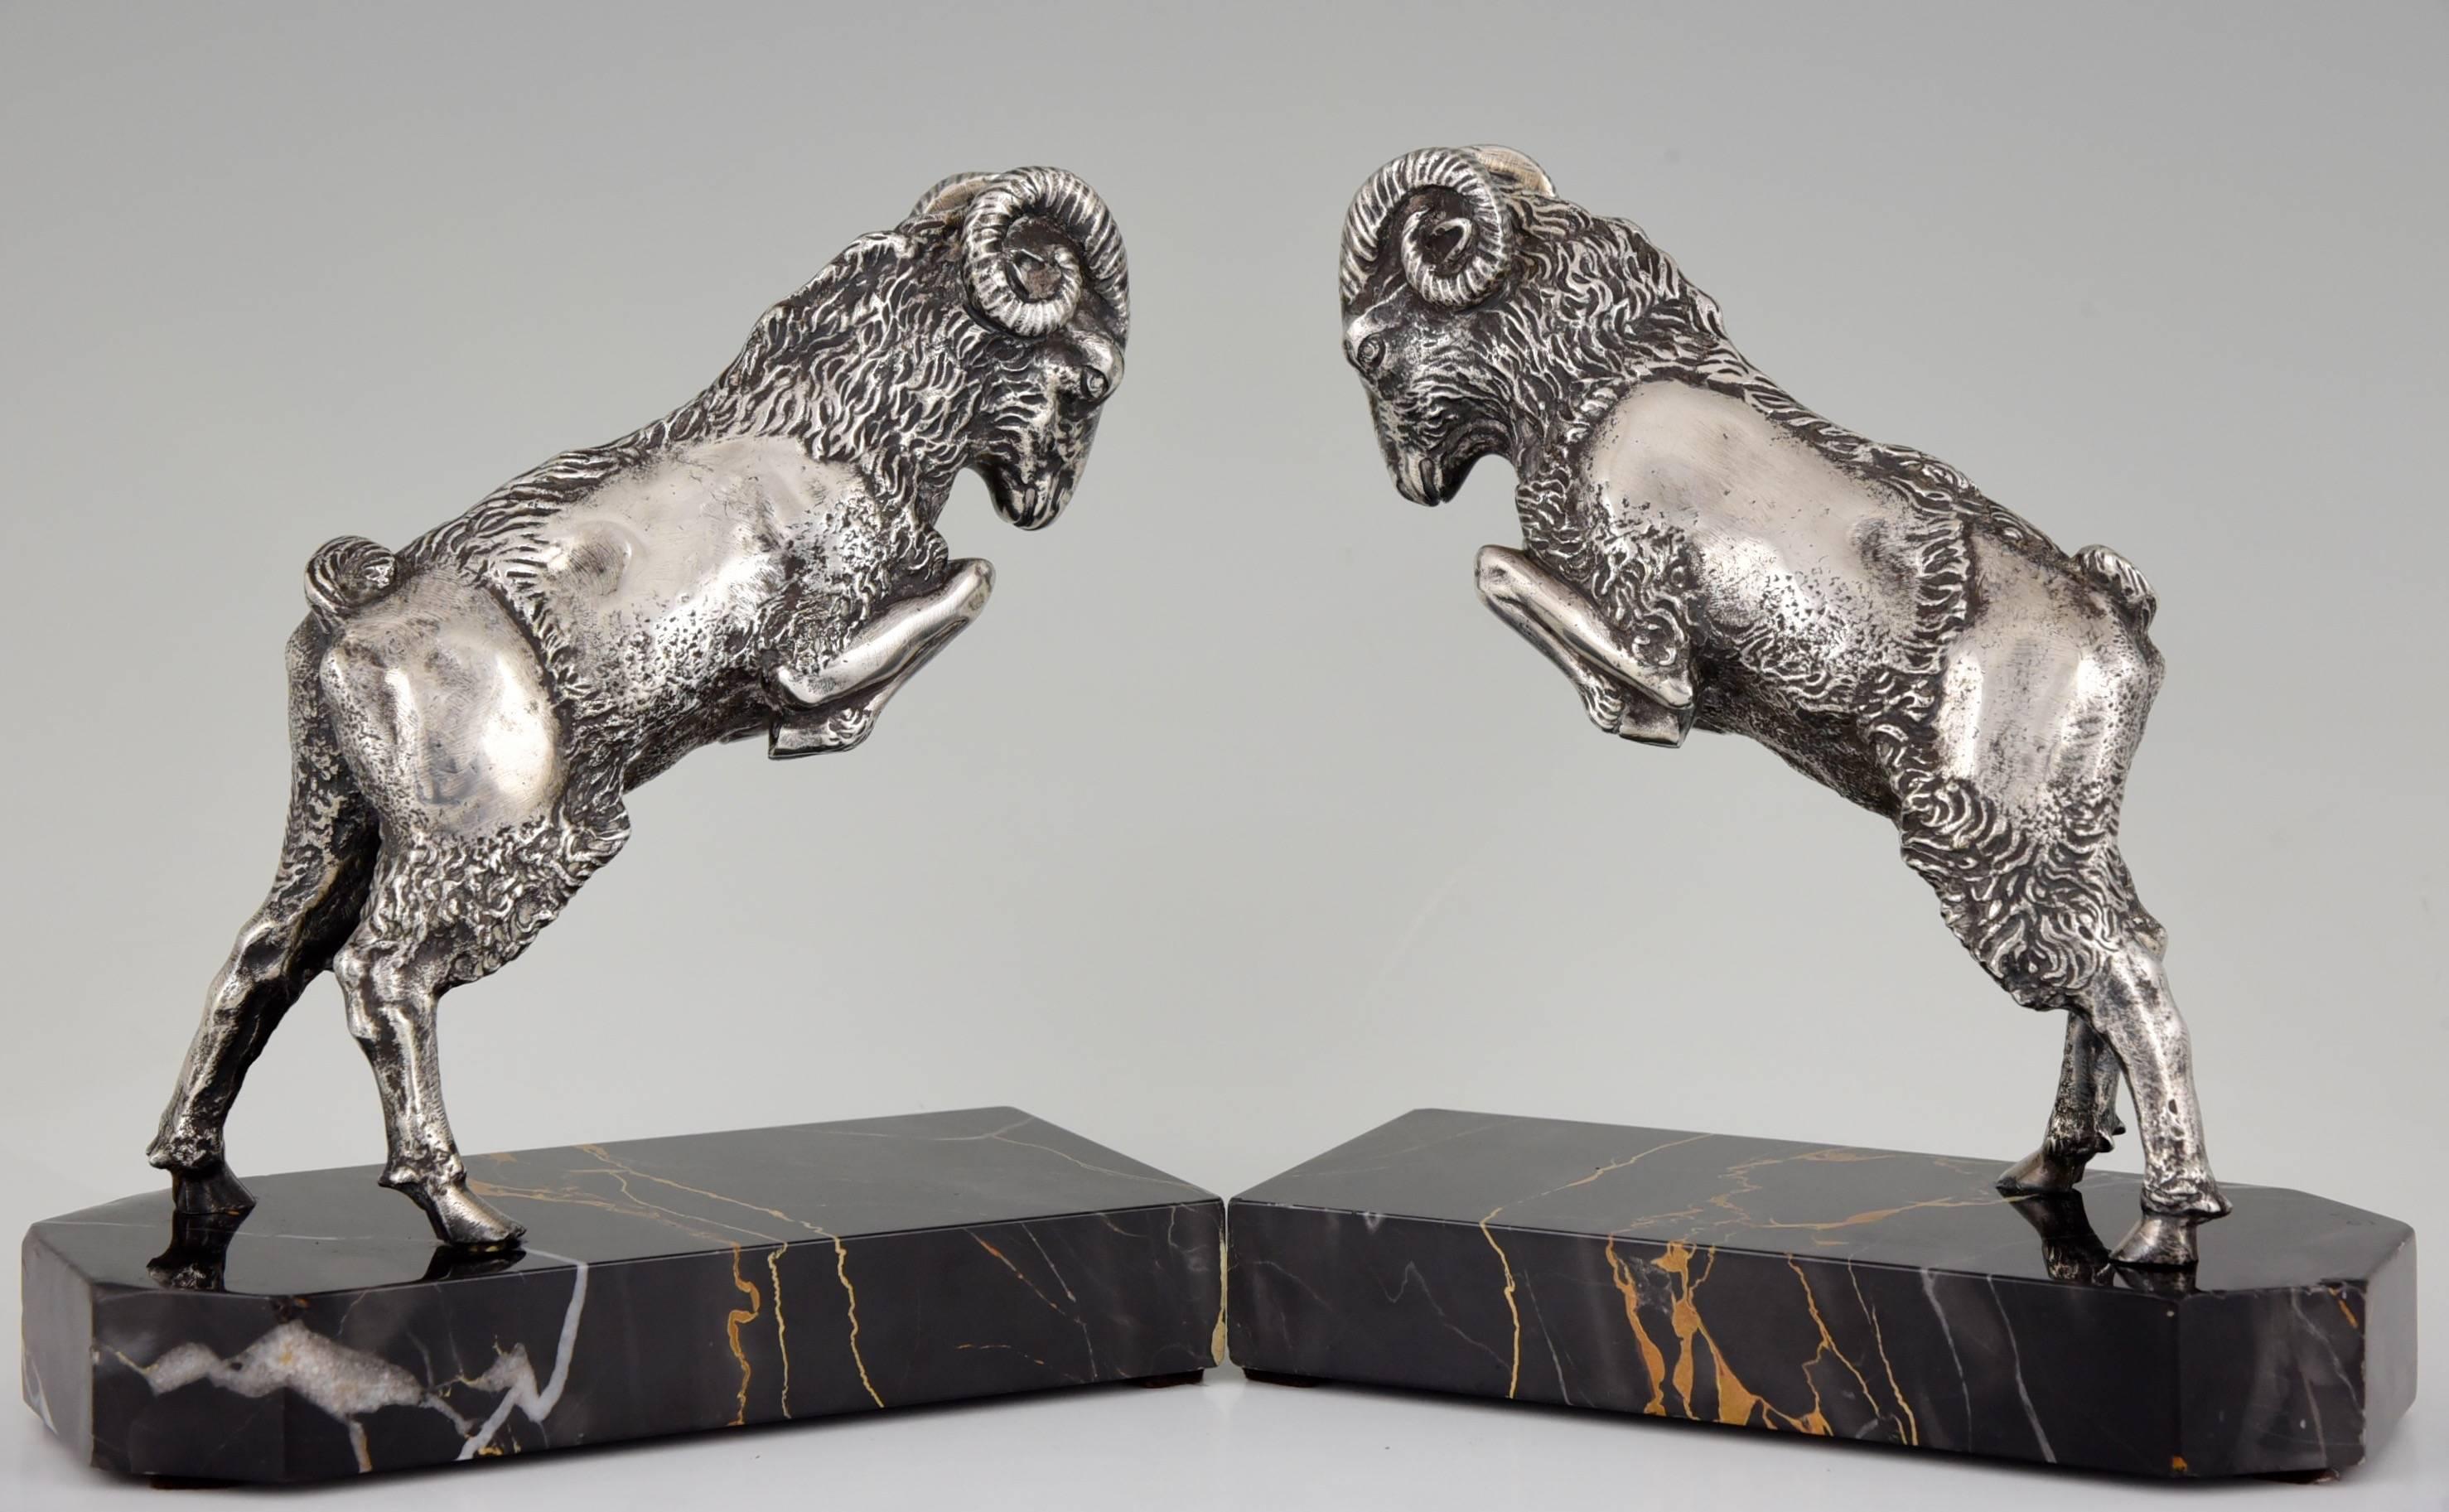 Description:  Art Deco bronze ram bookends.
Artist / Maker: Scribe.
Signature / Marks:  Scribe.
Style:  Art Deco. 
Date:  circa 1925/1930.
Material:  Bronze with silver patina on marble base. 
Origin:  France. 
Size of one:  
H 7.5 inch x L